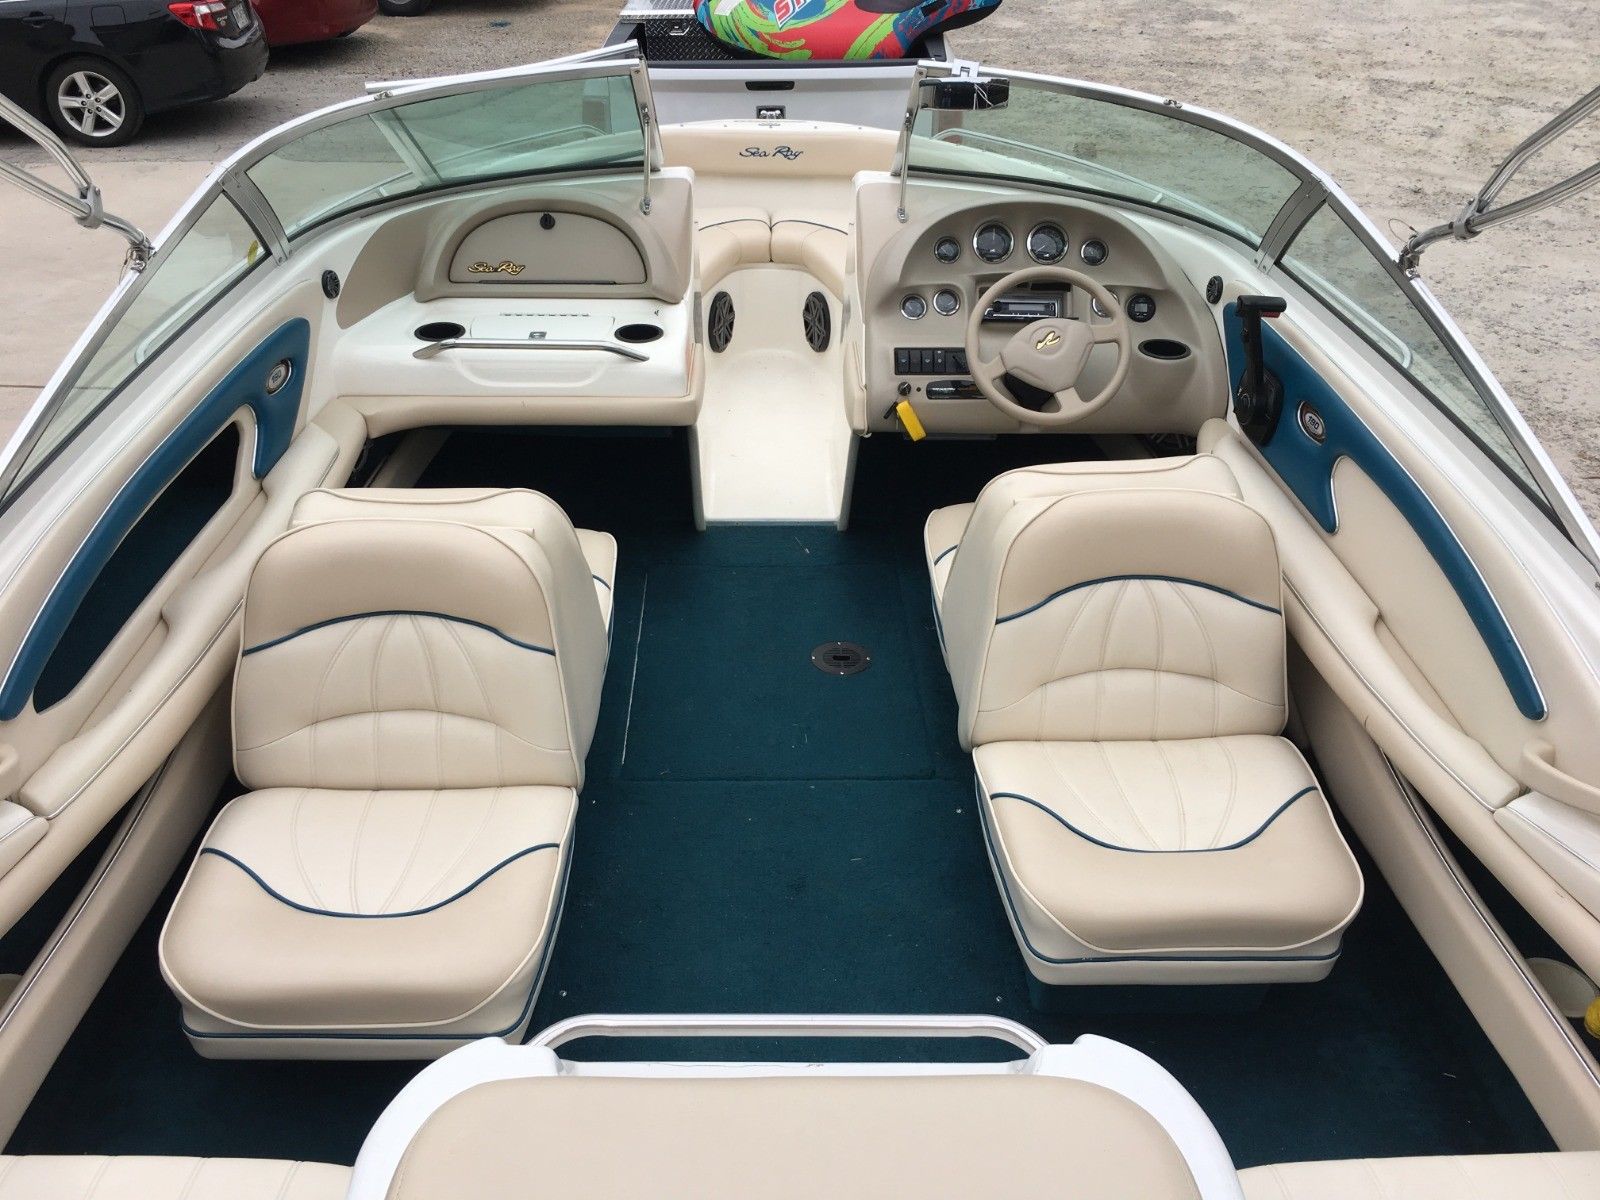 Sea Ray Signature 190 1997 for sale for $11,250 - Boats-from-USA.com